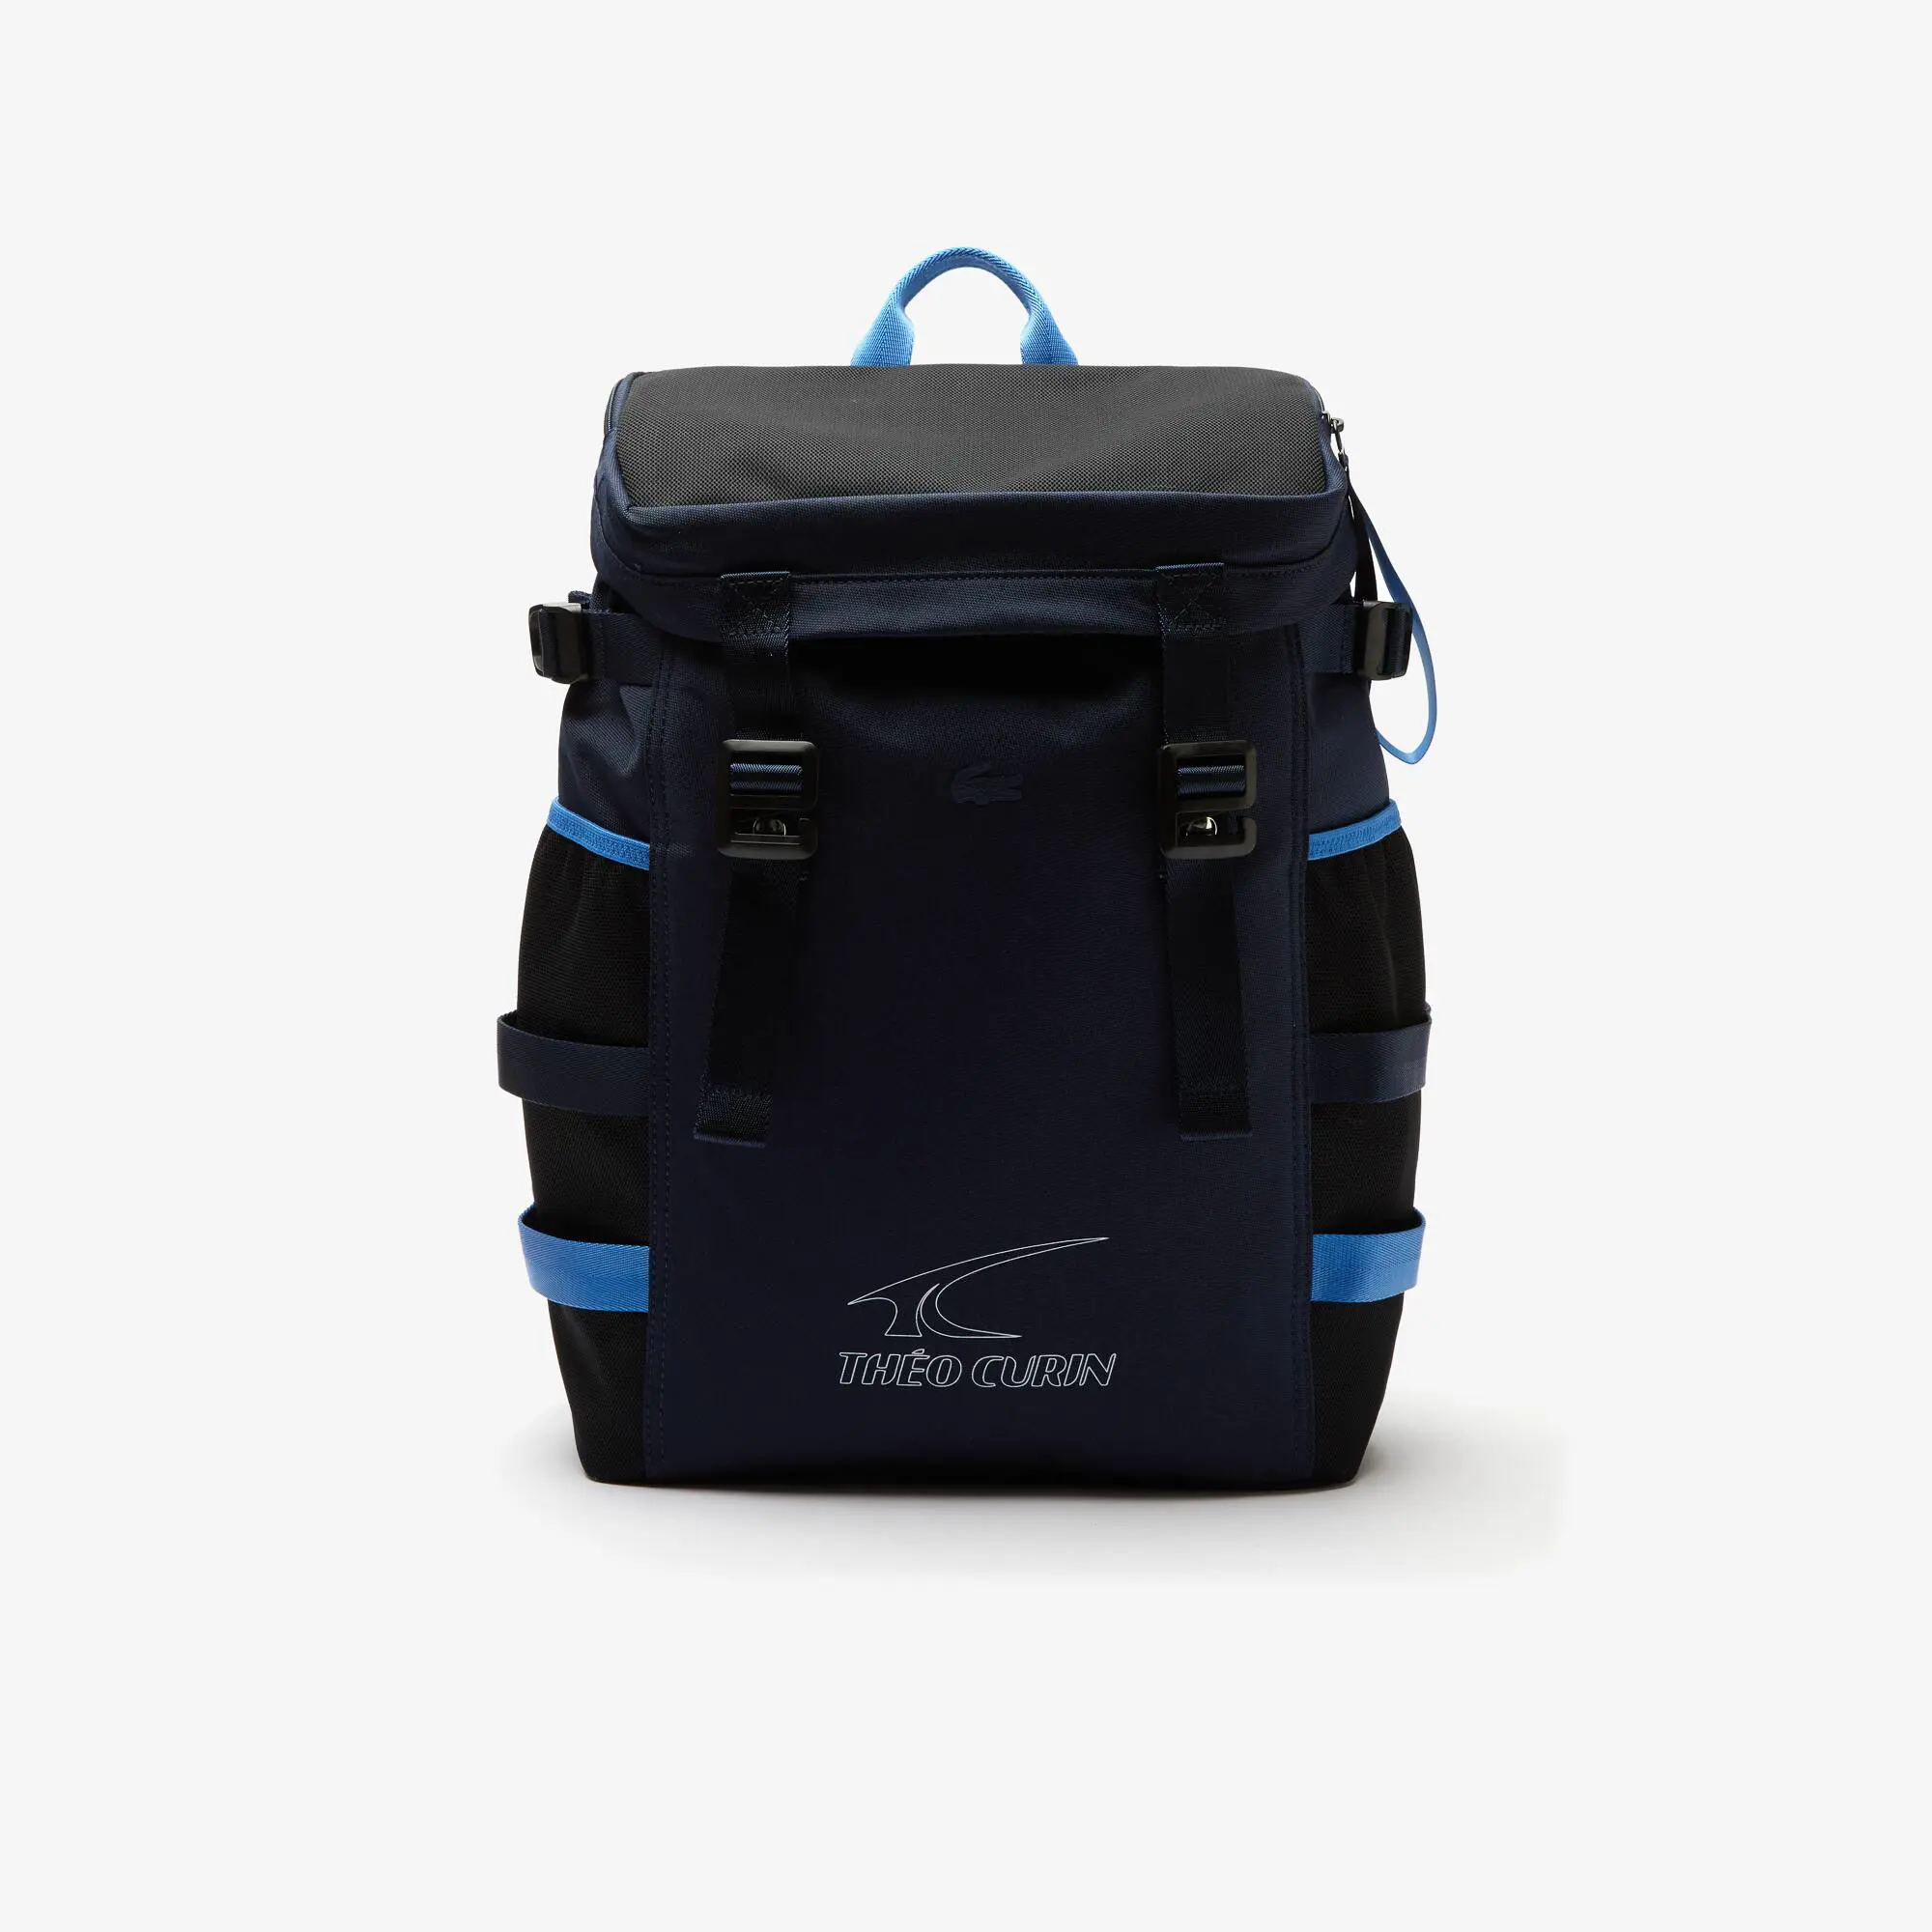 Lacoste Men's Lacoste x Théo Curin Technical Canvas Backpack. 2